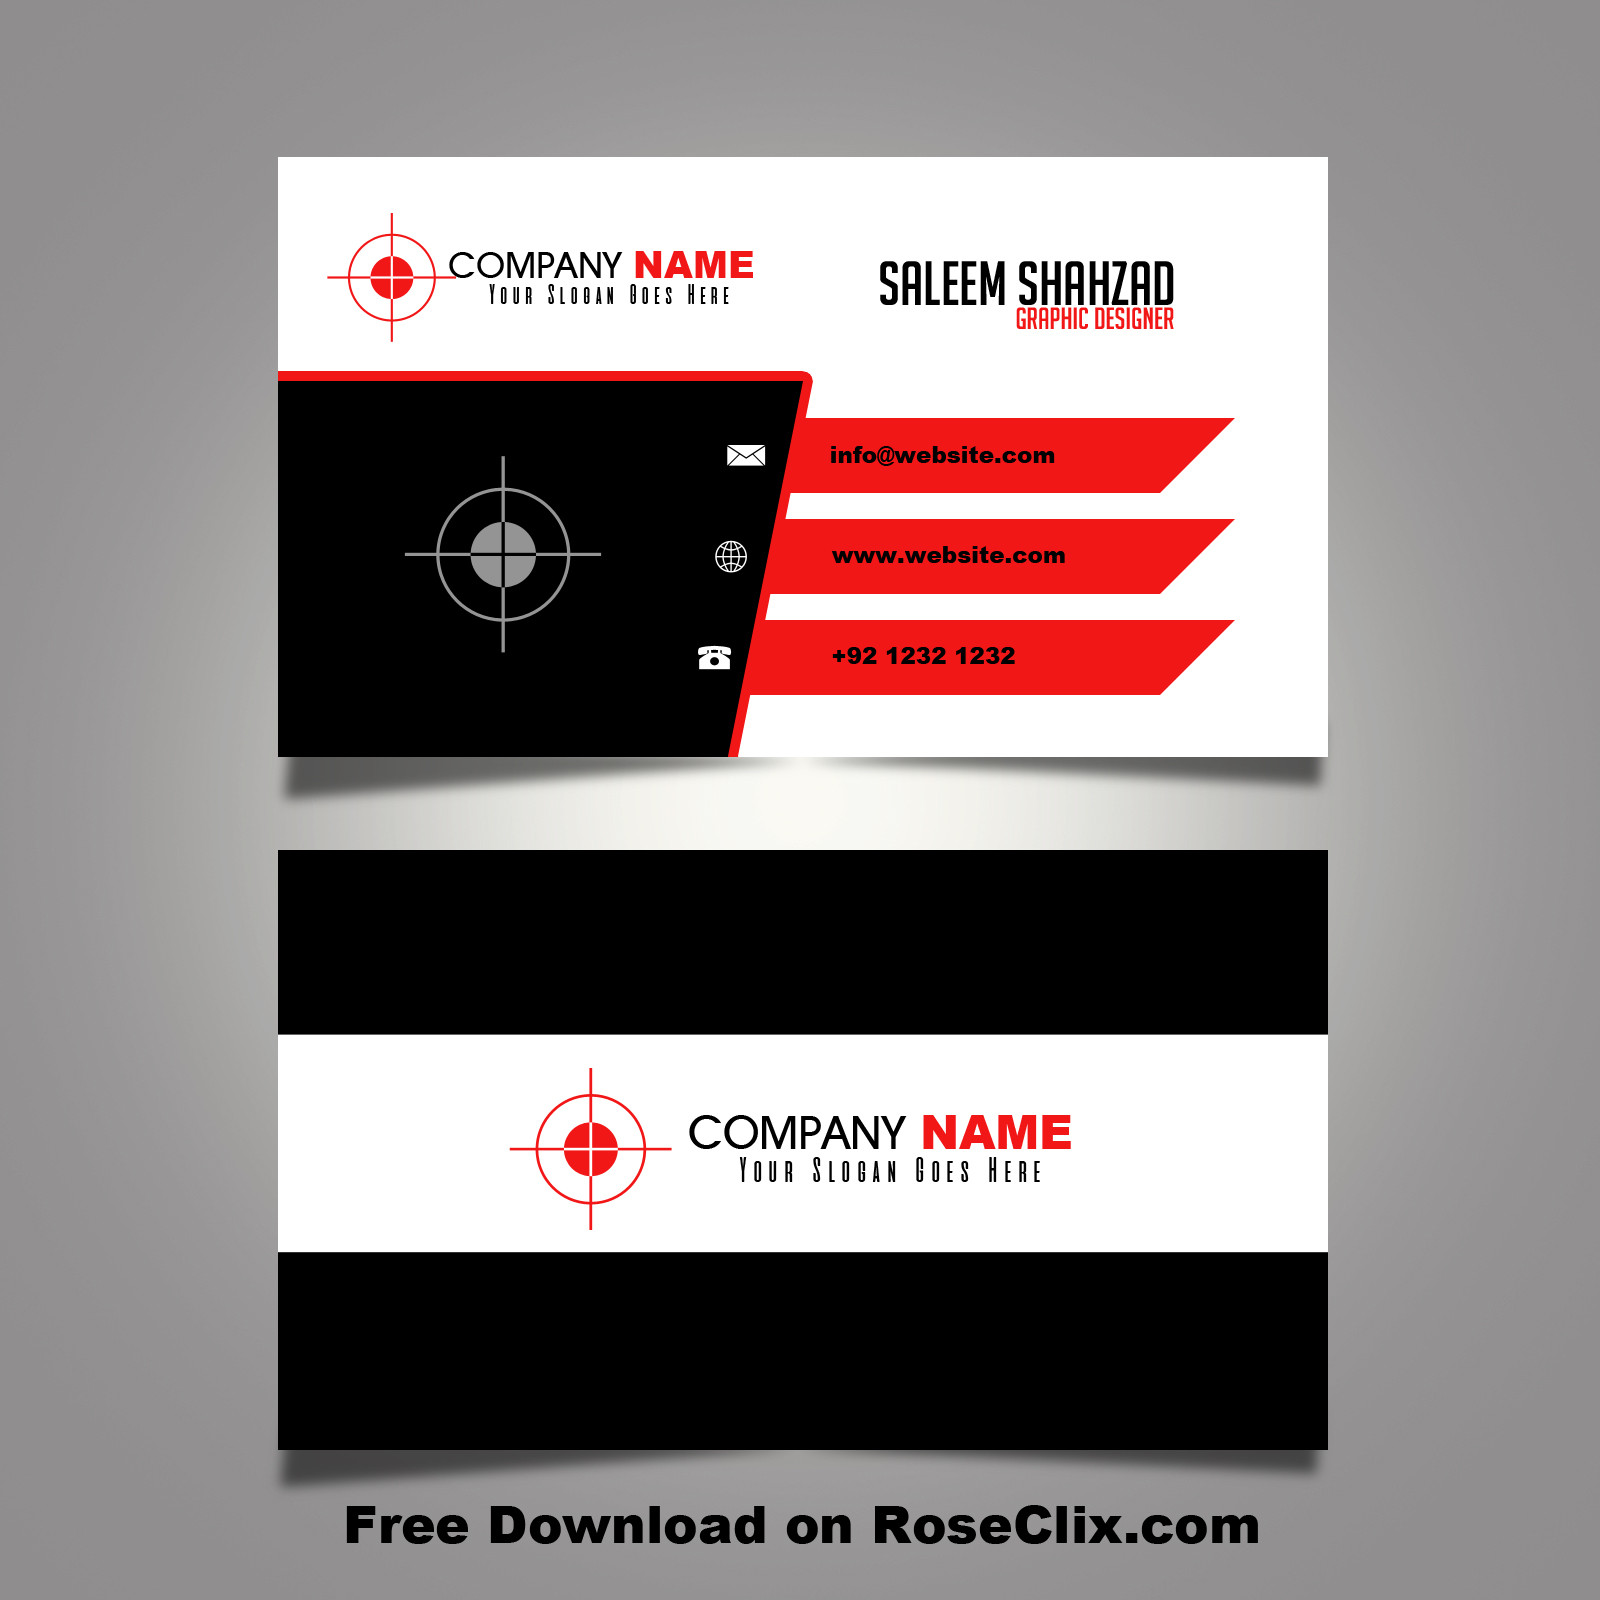 002 245 Gall E00cb9 Template Ideas Free Downloads Of Free Photoshop Business Card Templates Psd